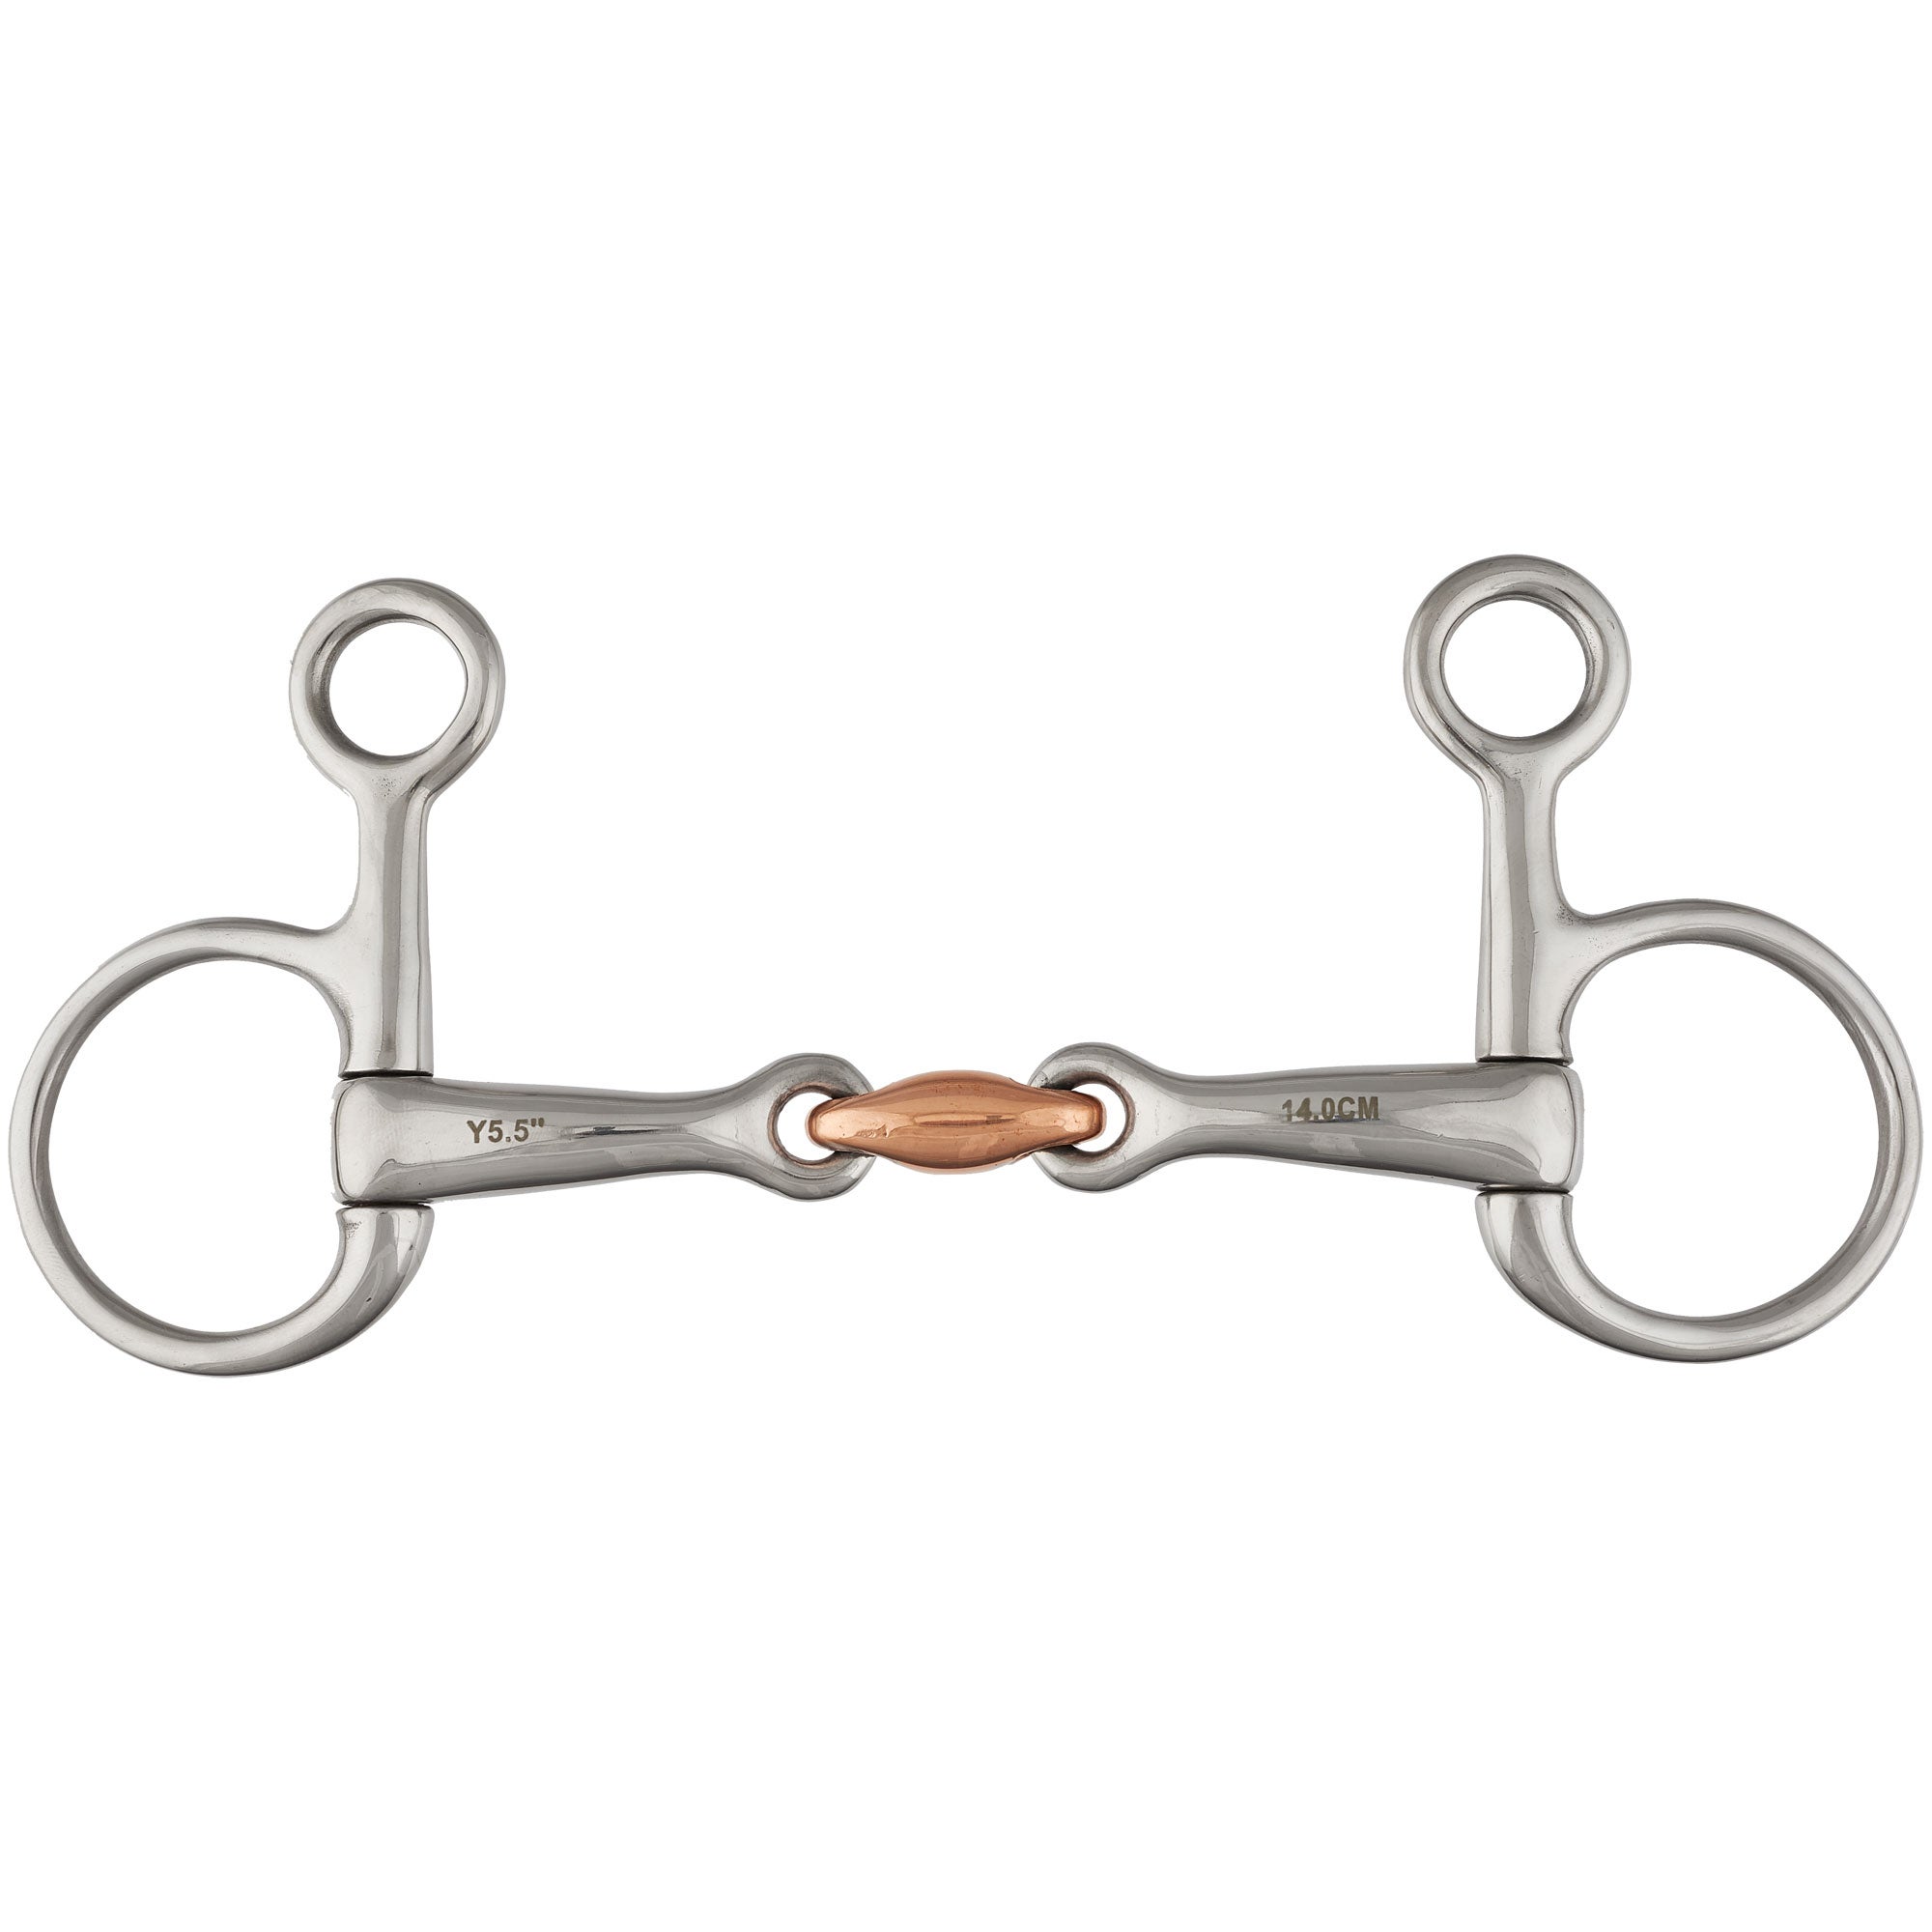 14cm CS  Stainless Steel Baucher hanging with Copper Lozenge  5.5" 